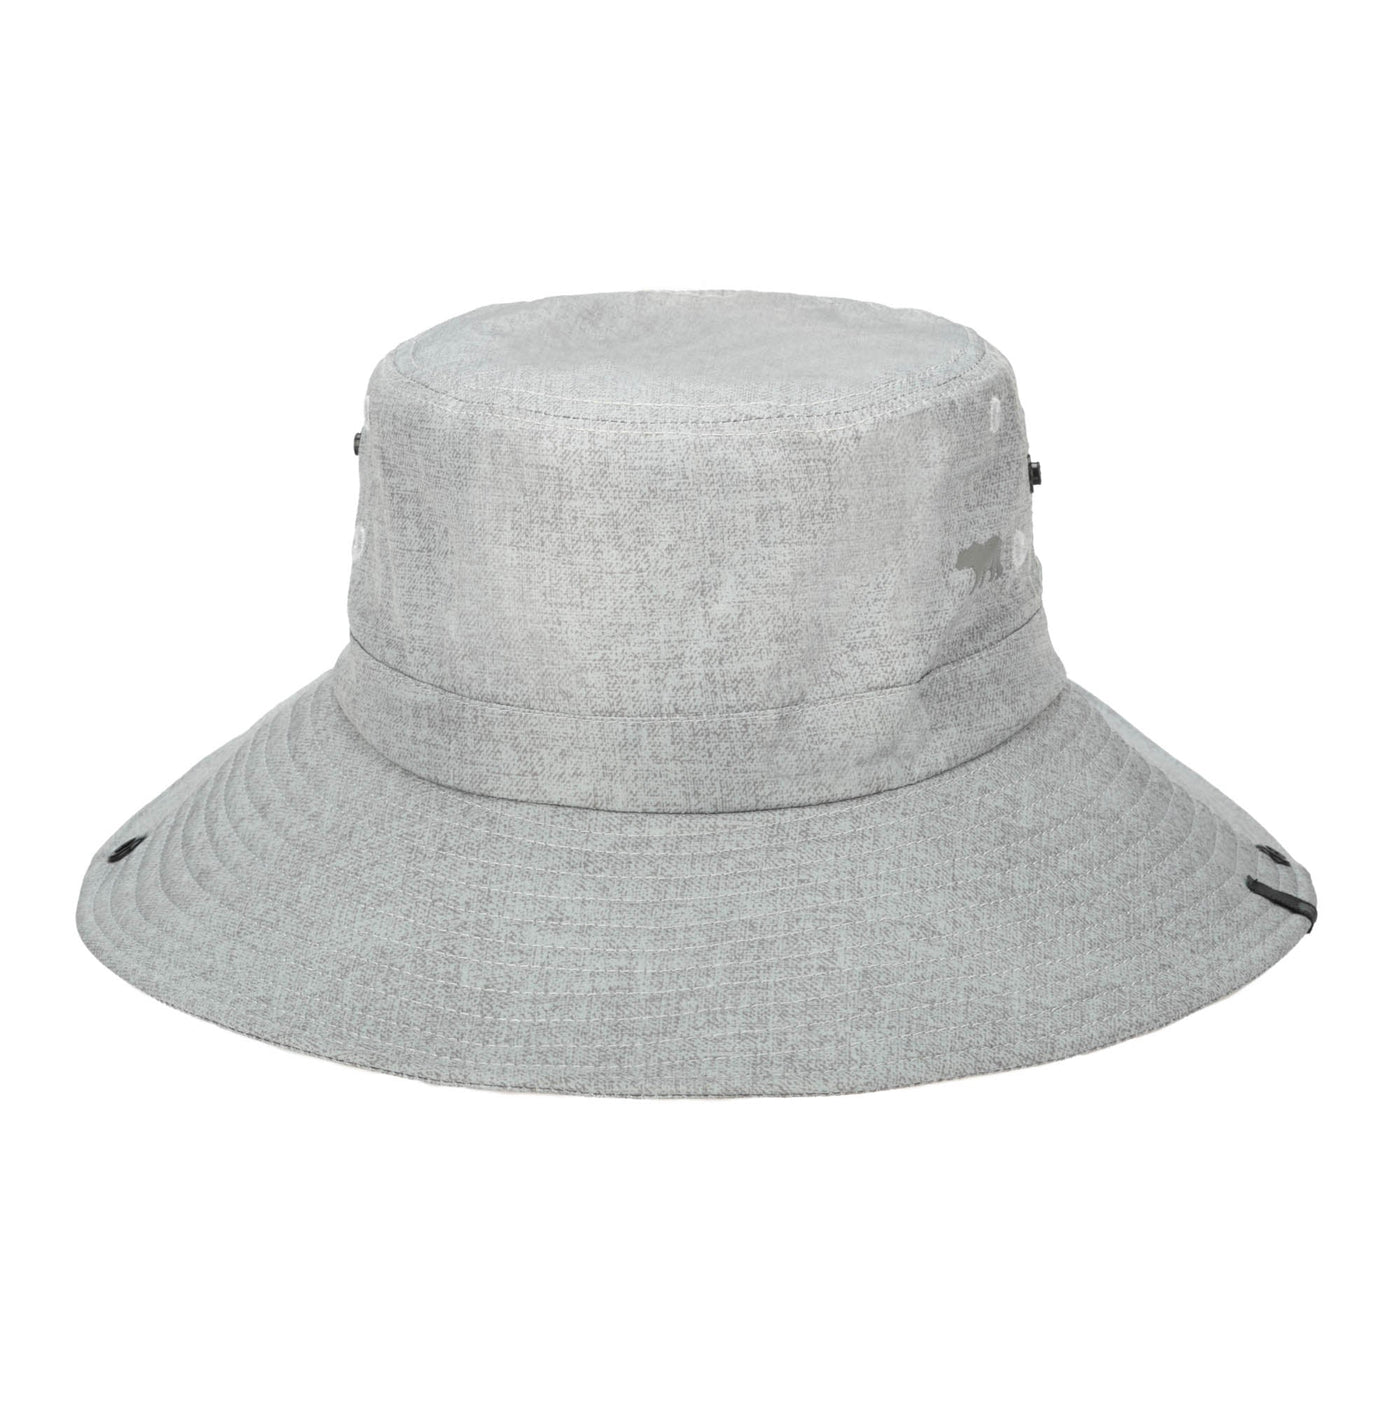 Outdoor Boonie Hat with Flap Hat Neck San Company – Cord Chin Diego Adjustable and